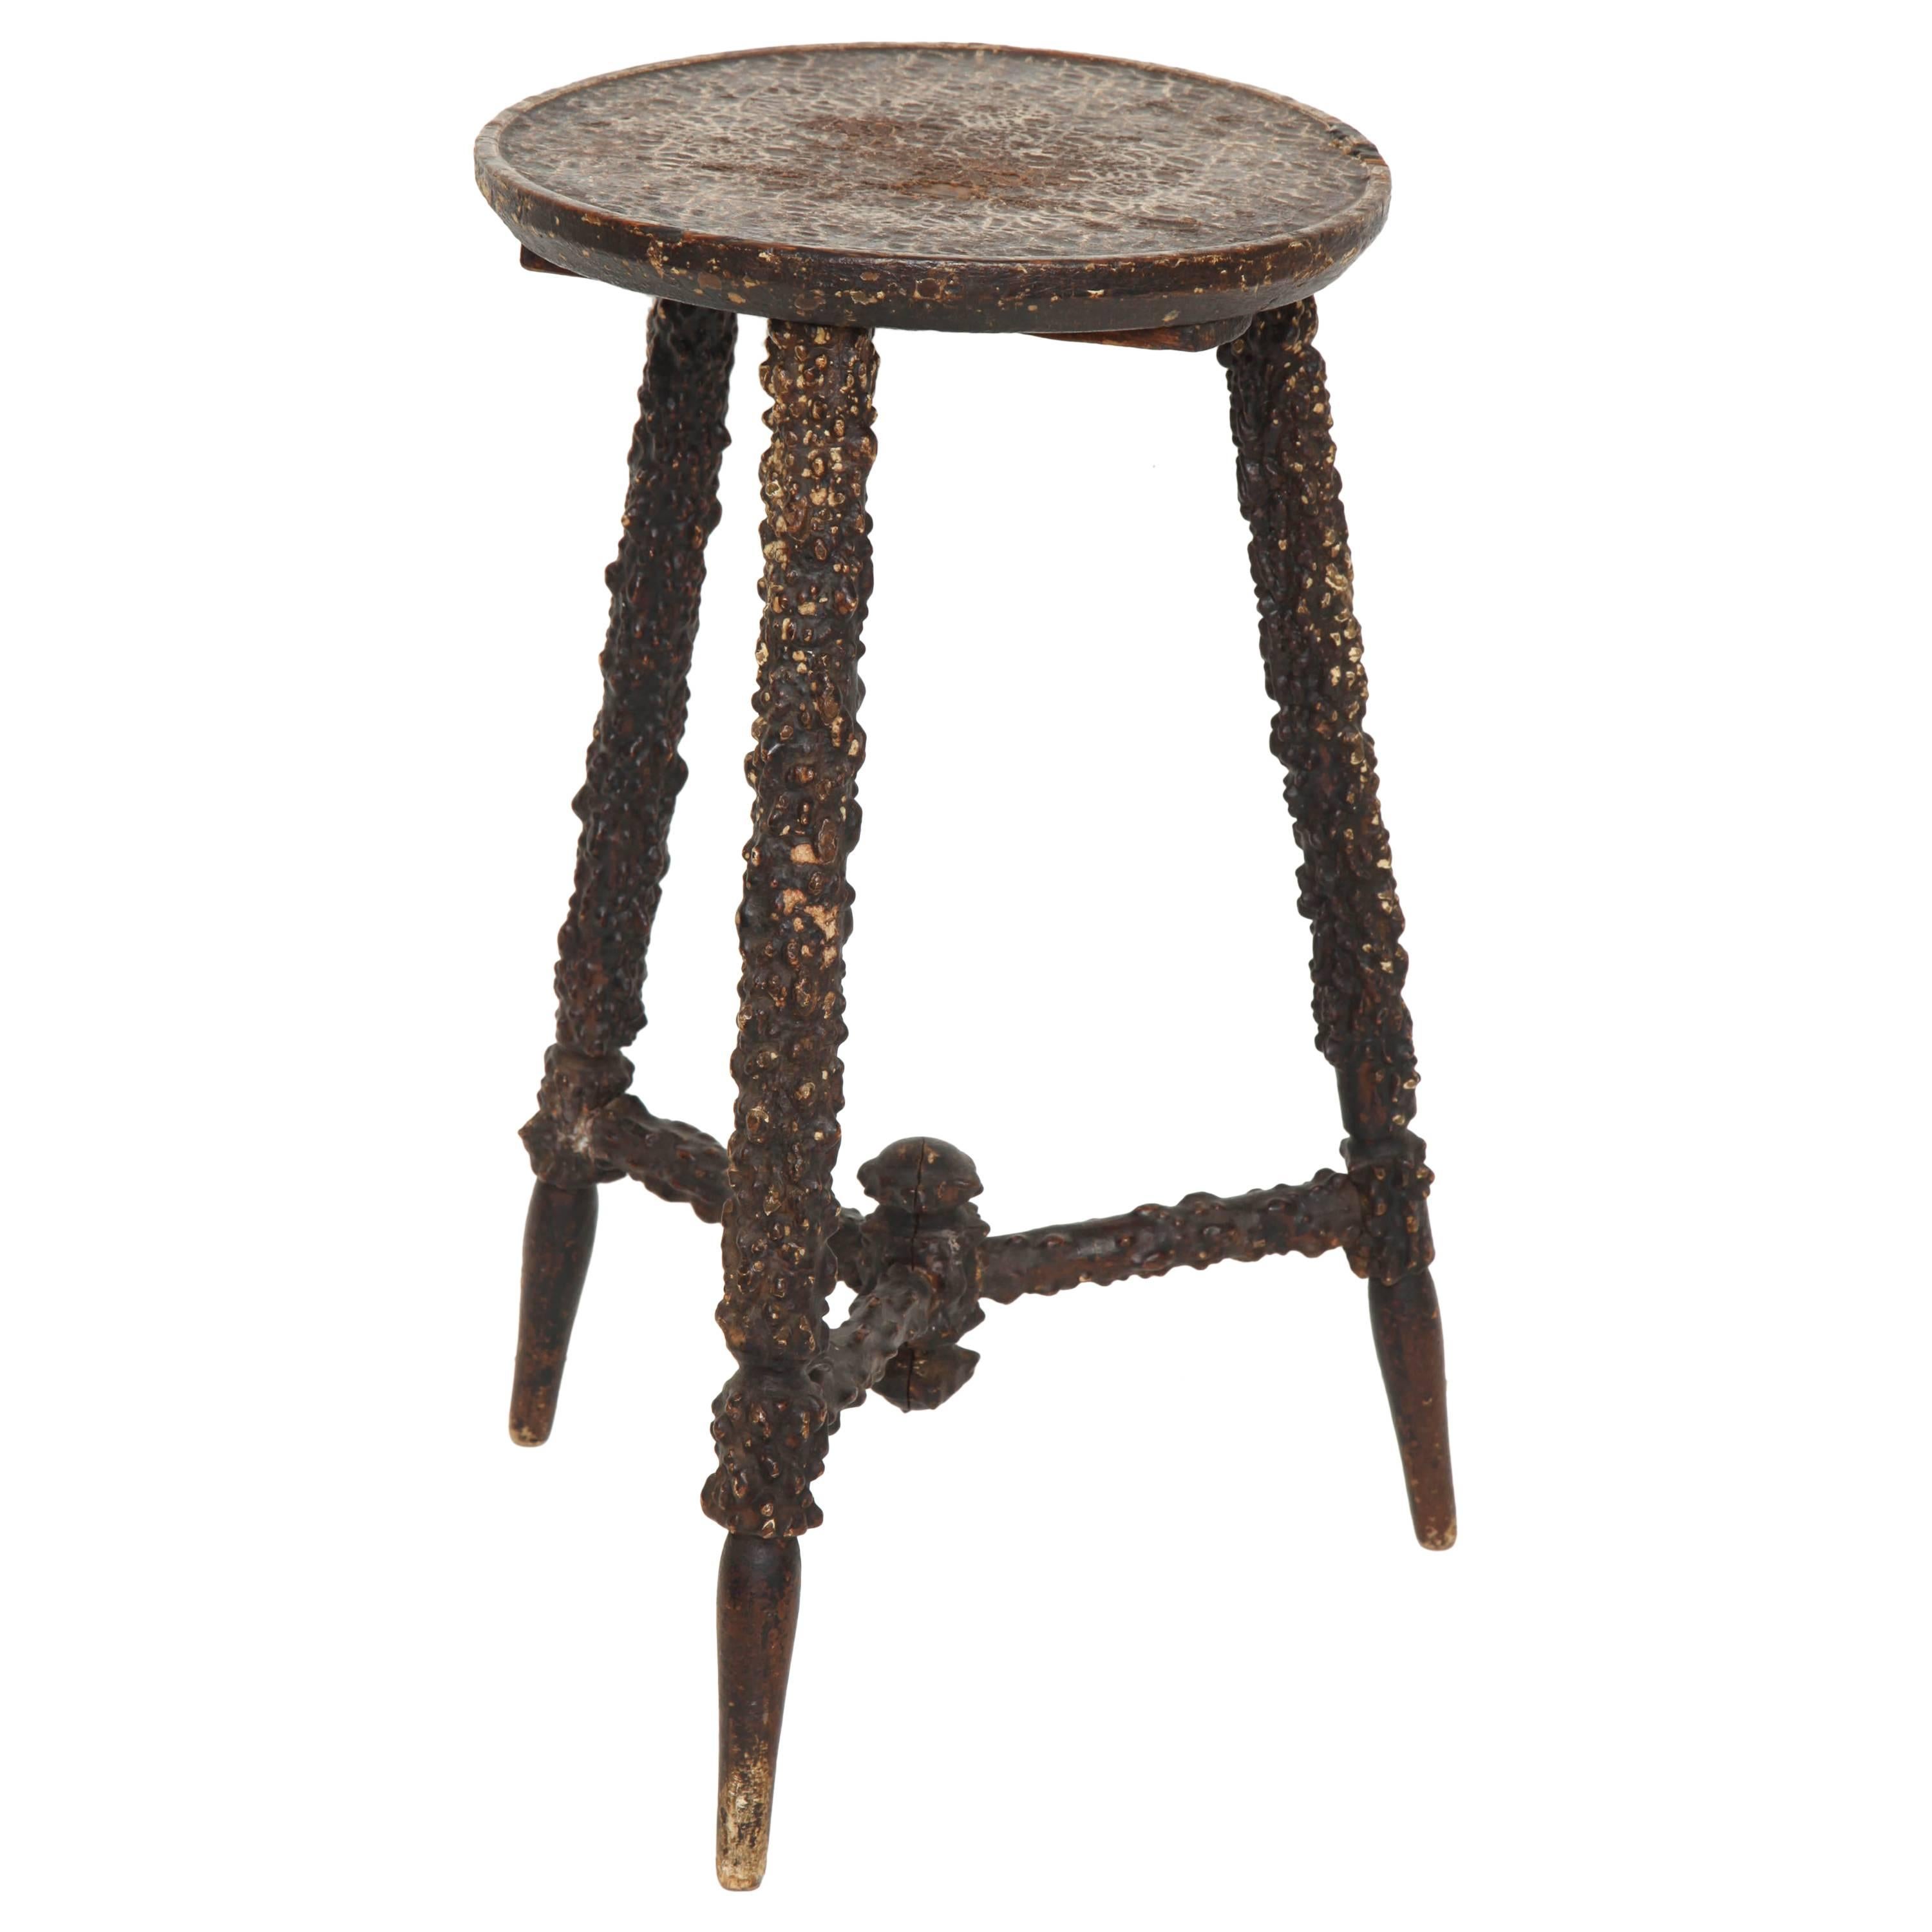 A Late 19th Century English Rusticated Stool